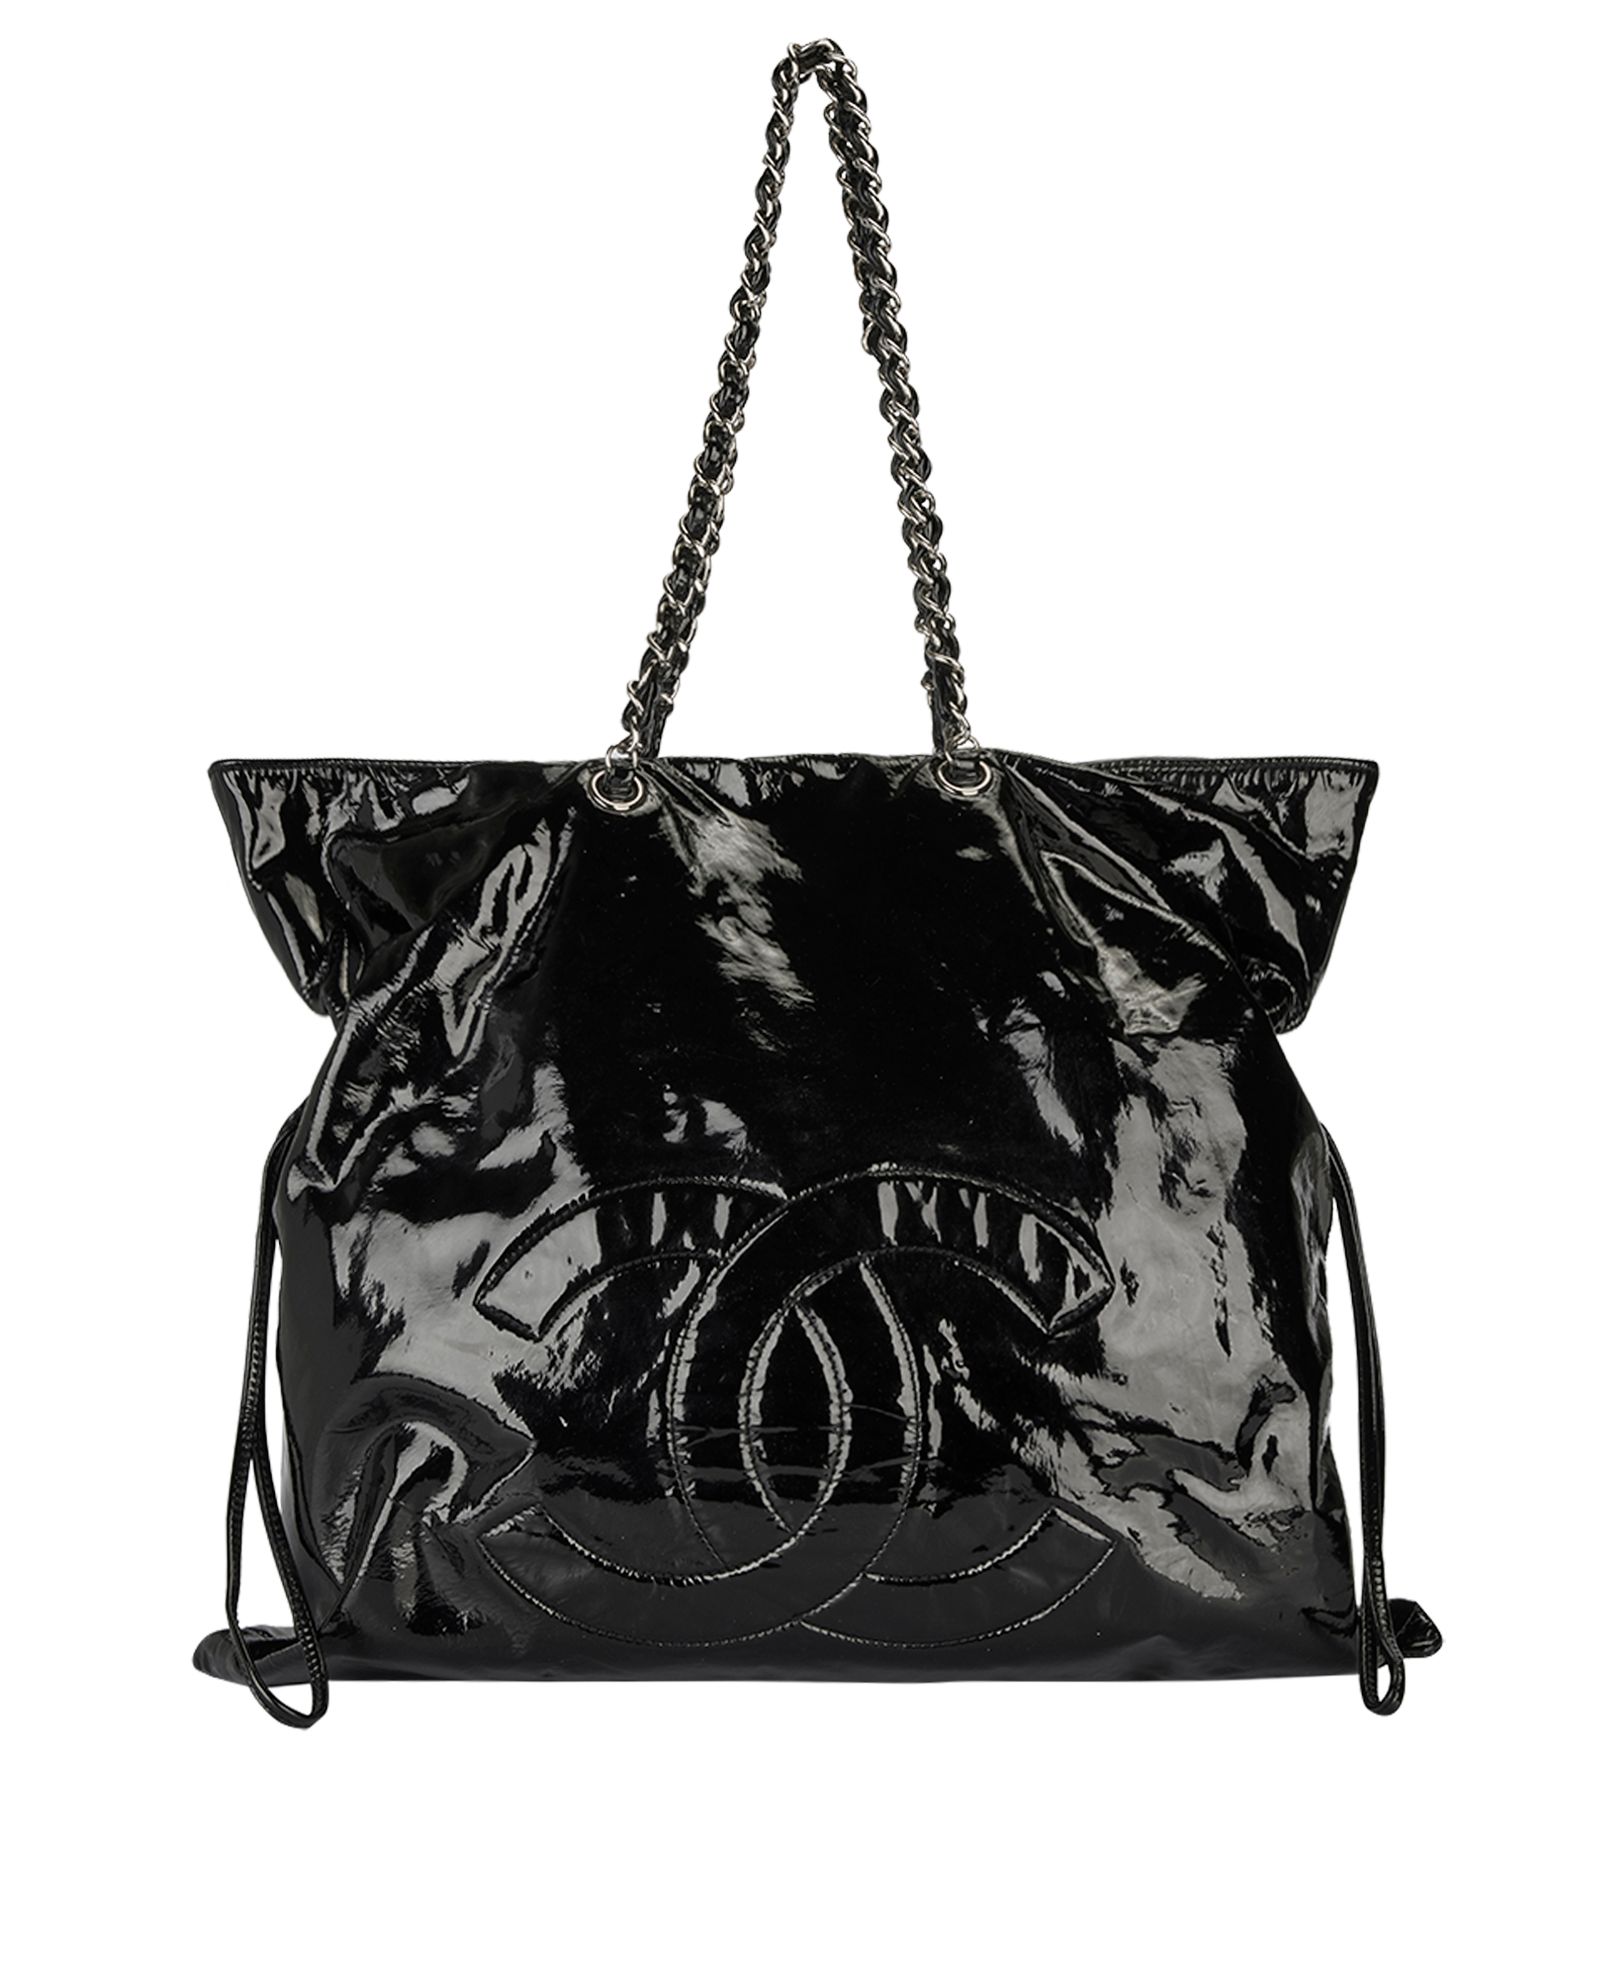 CHANEL, Bags, Chanel Drawstring Backpack